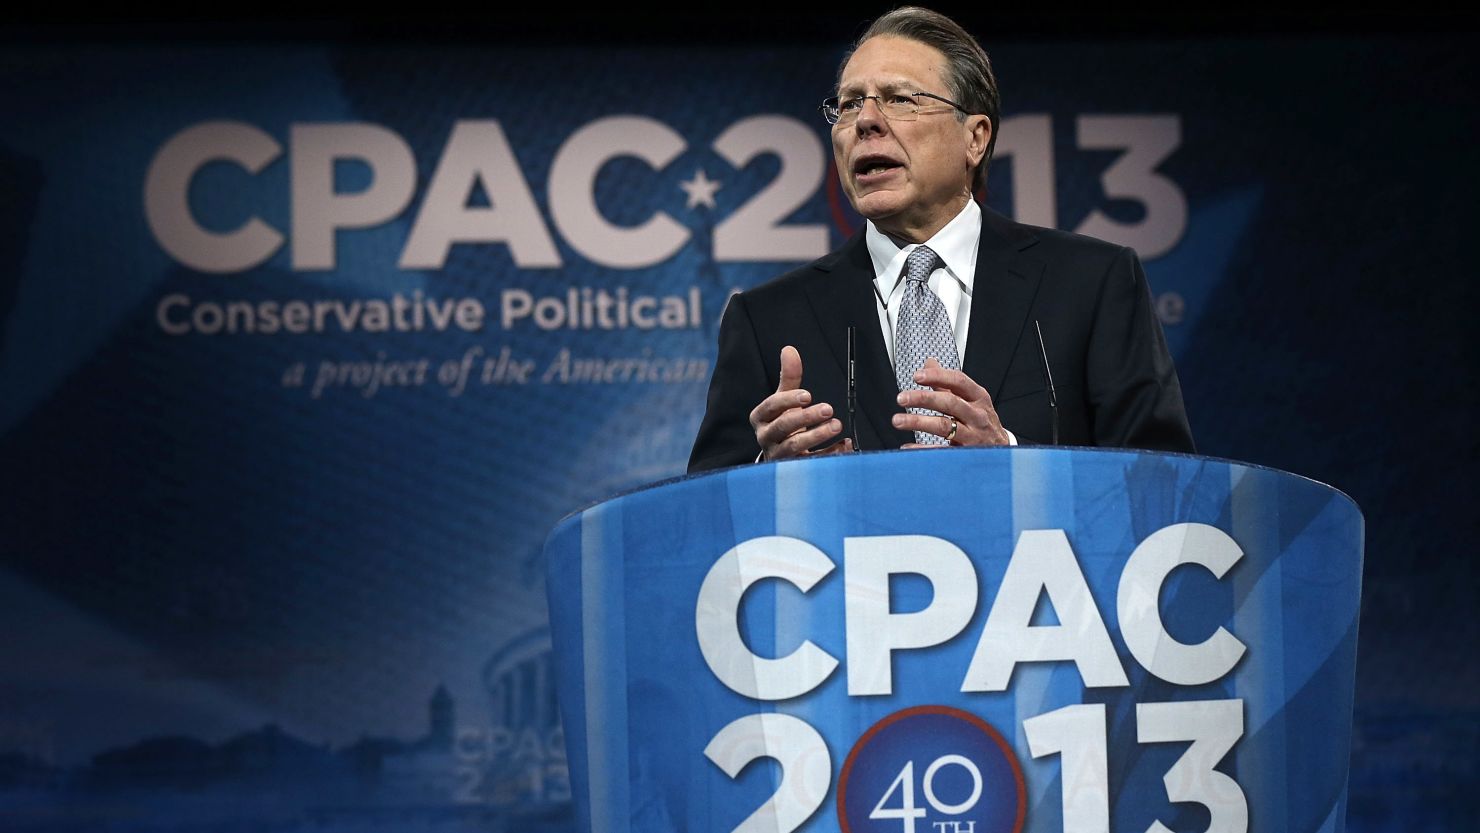 Wayne LaPierre, the executive vice president of the National Rifle Association, delivers remarks during the Conservative Political Action Conference.